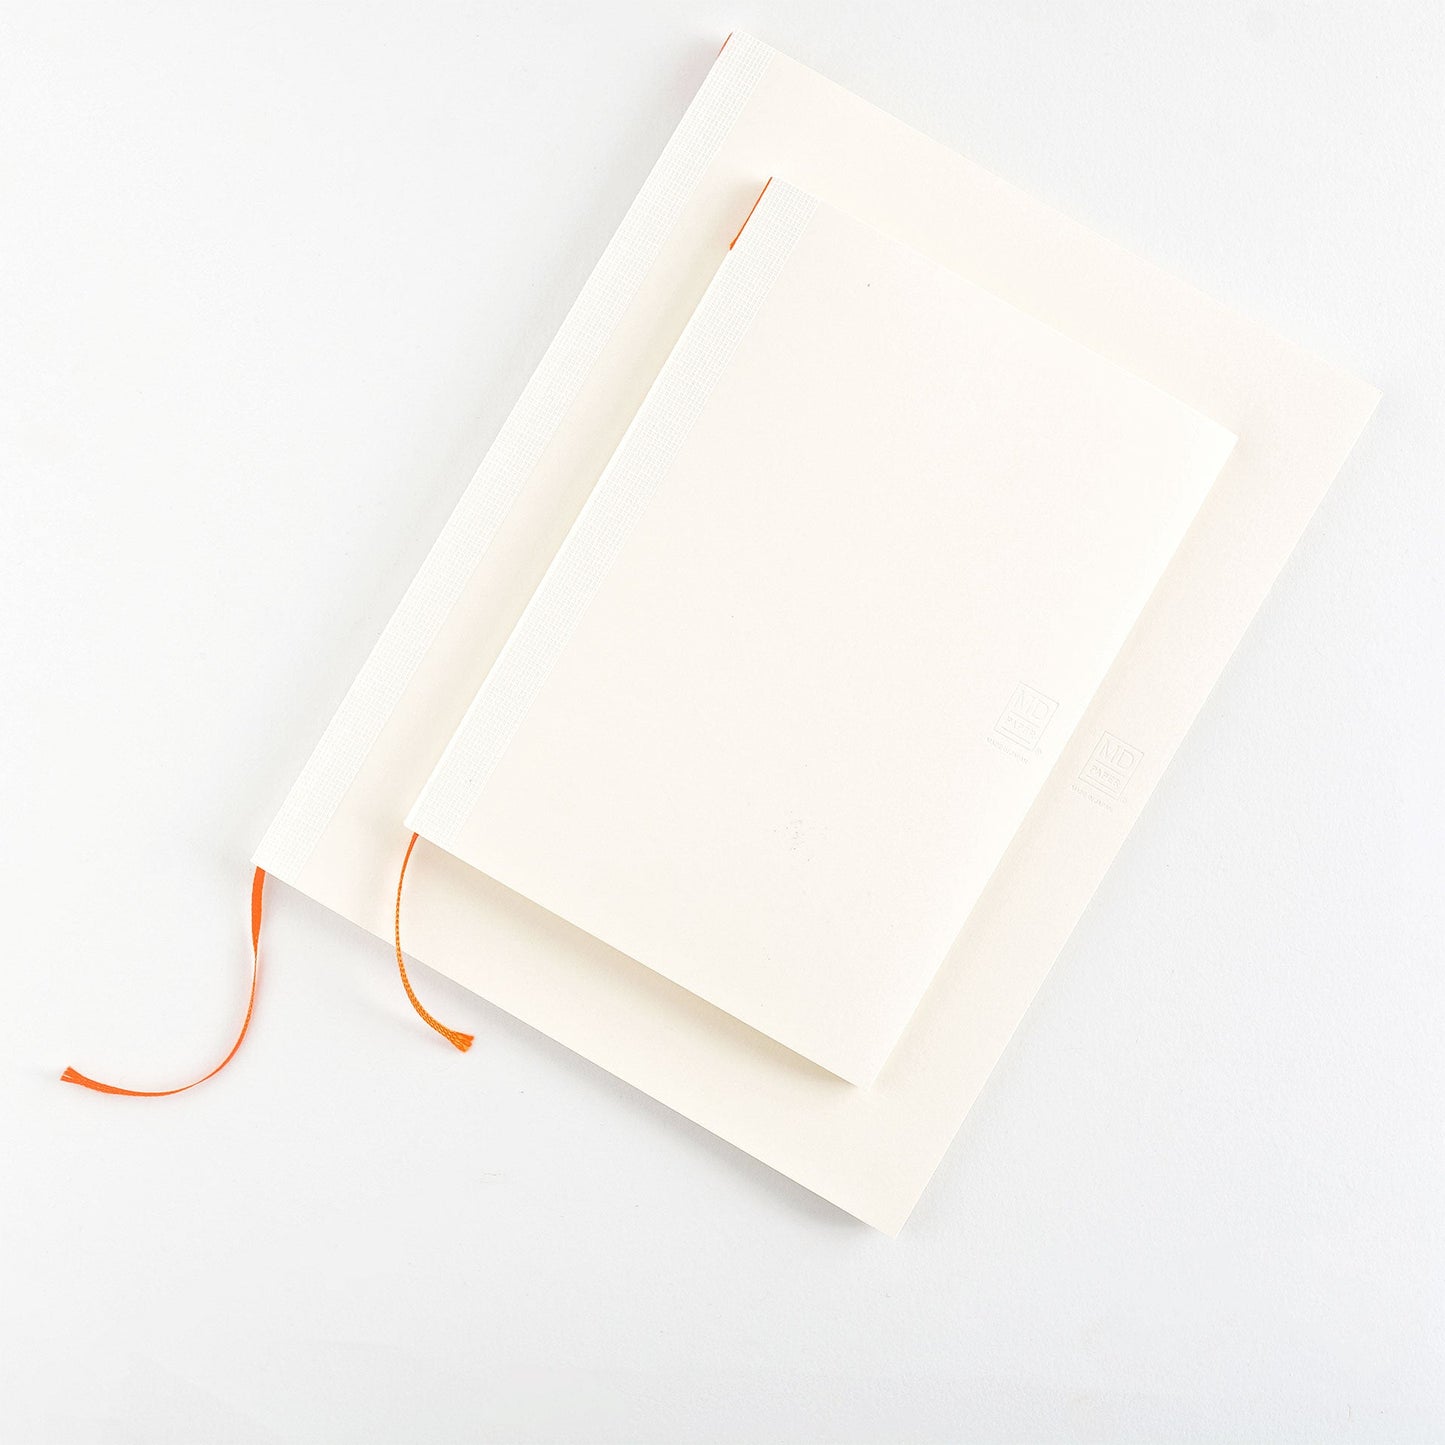 Midori MD Notebook Diary 2023 Thin |  A5 or A4 